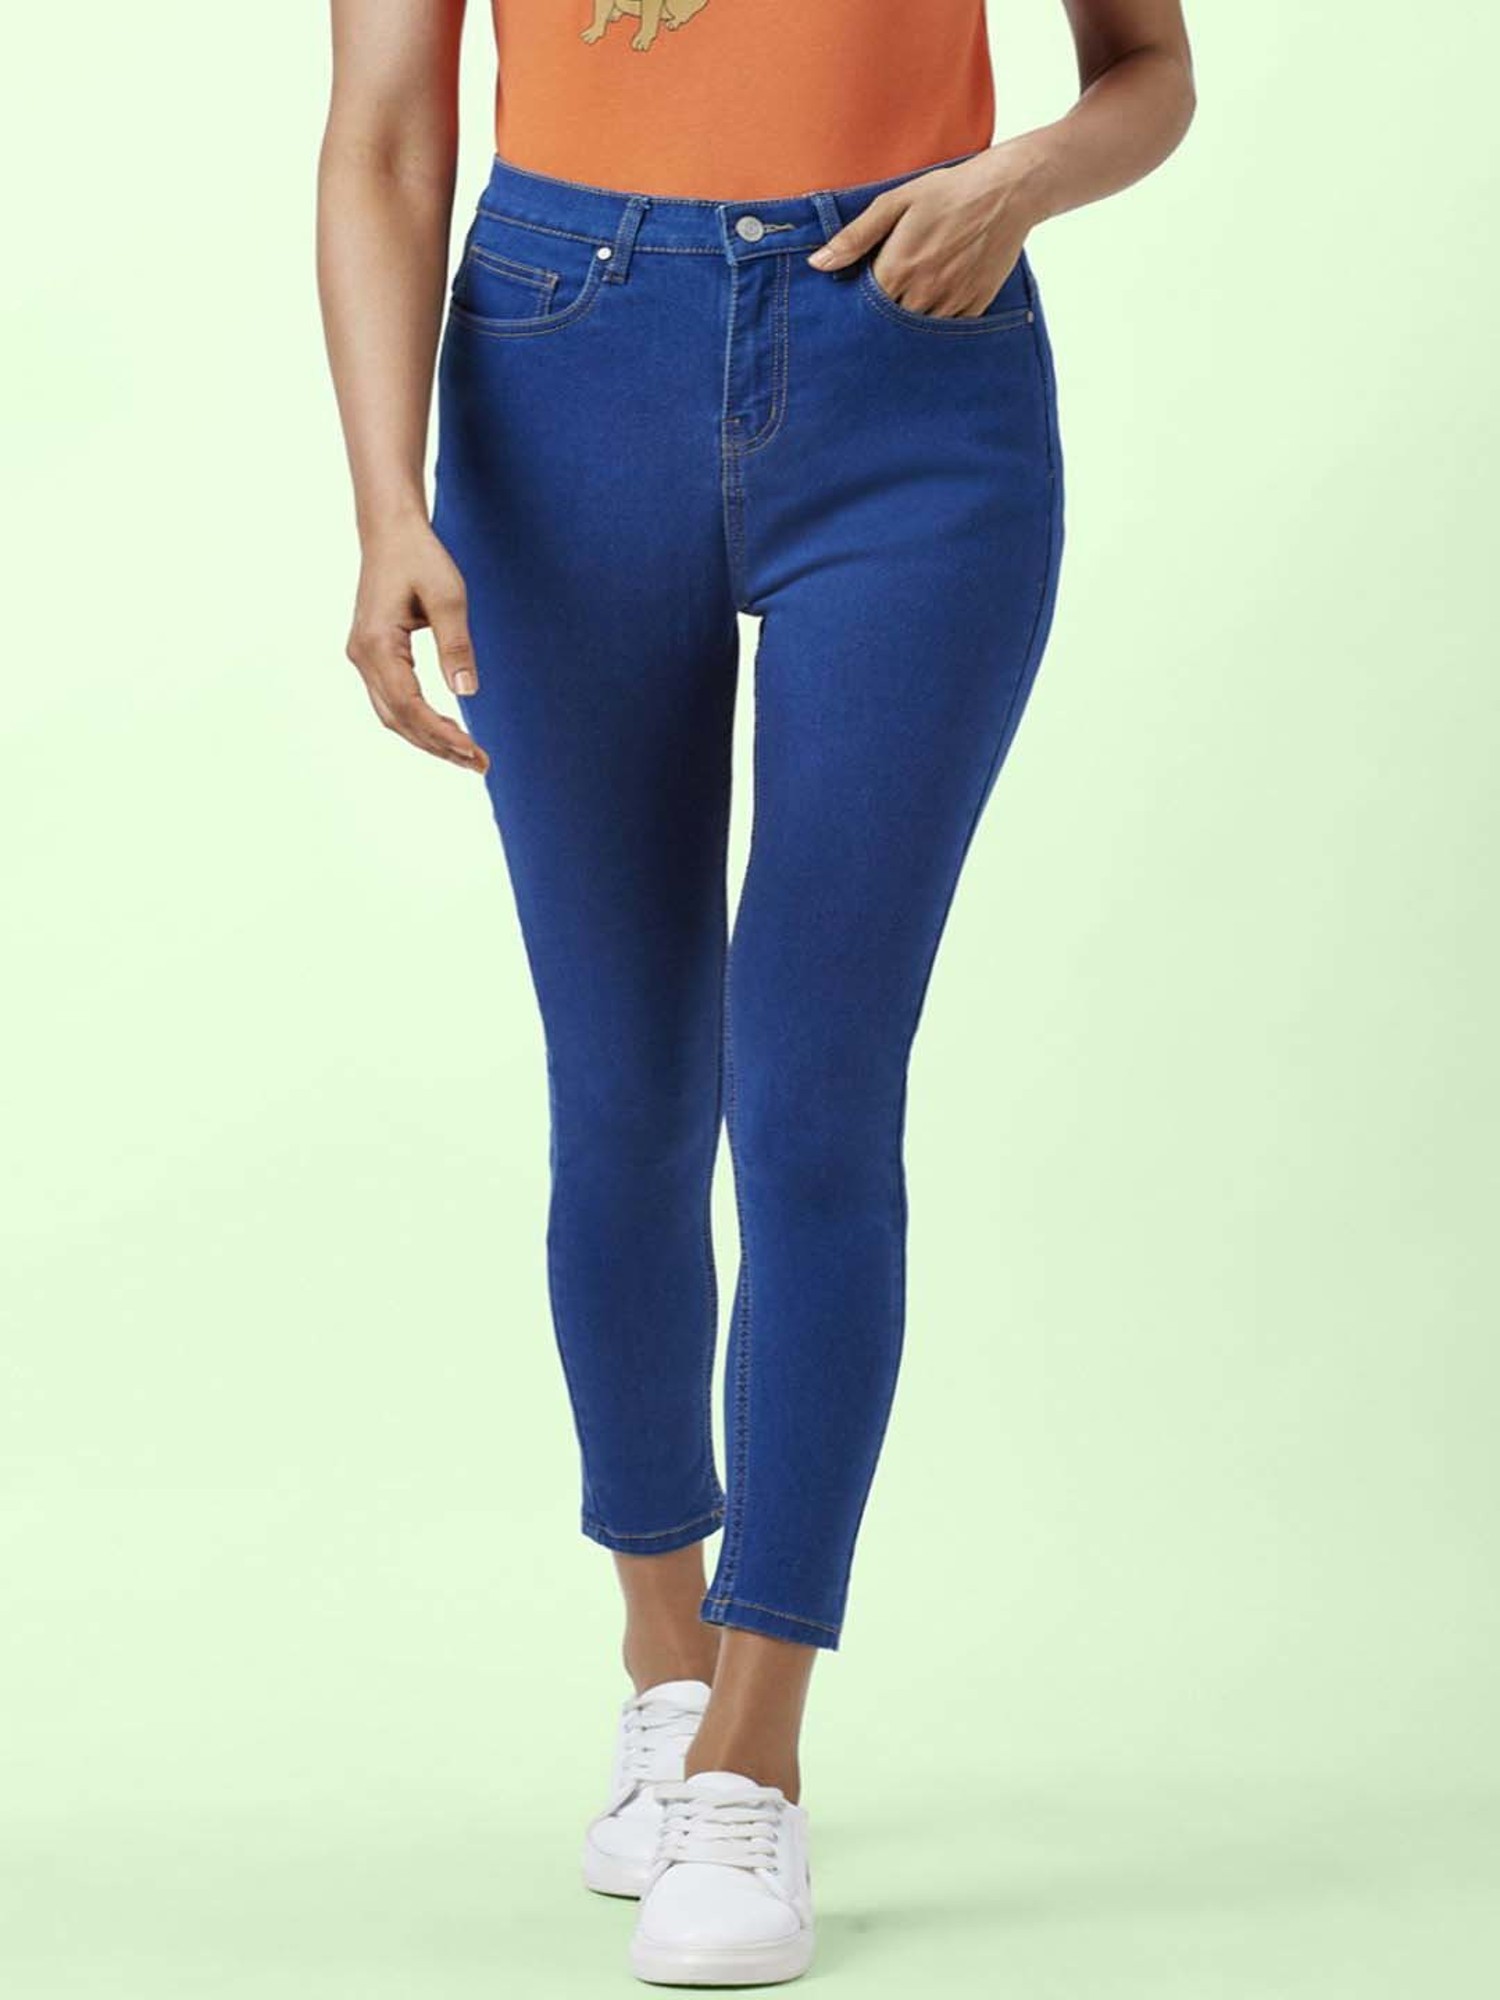 Stay Healthy and Energized in Your Yoga Denim Pants  ALL ABOUT INDIGO